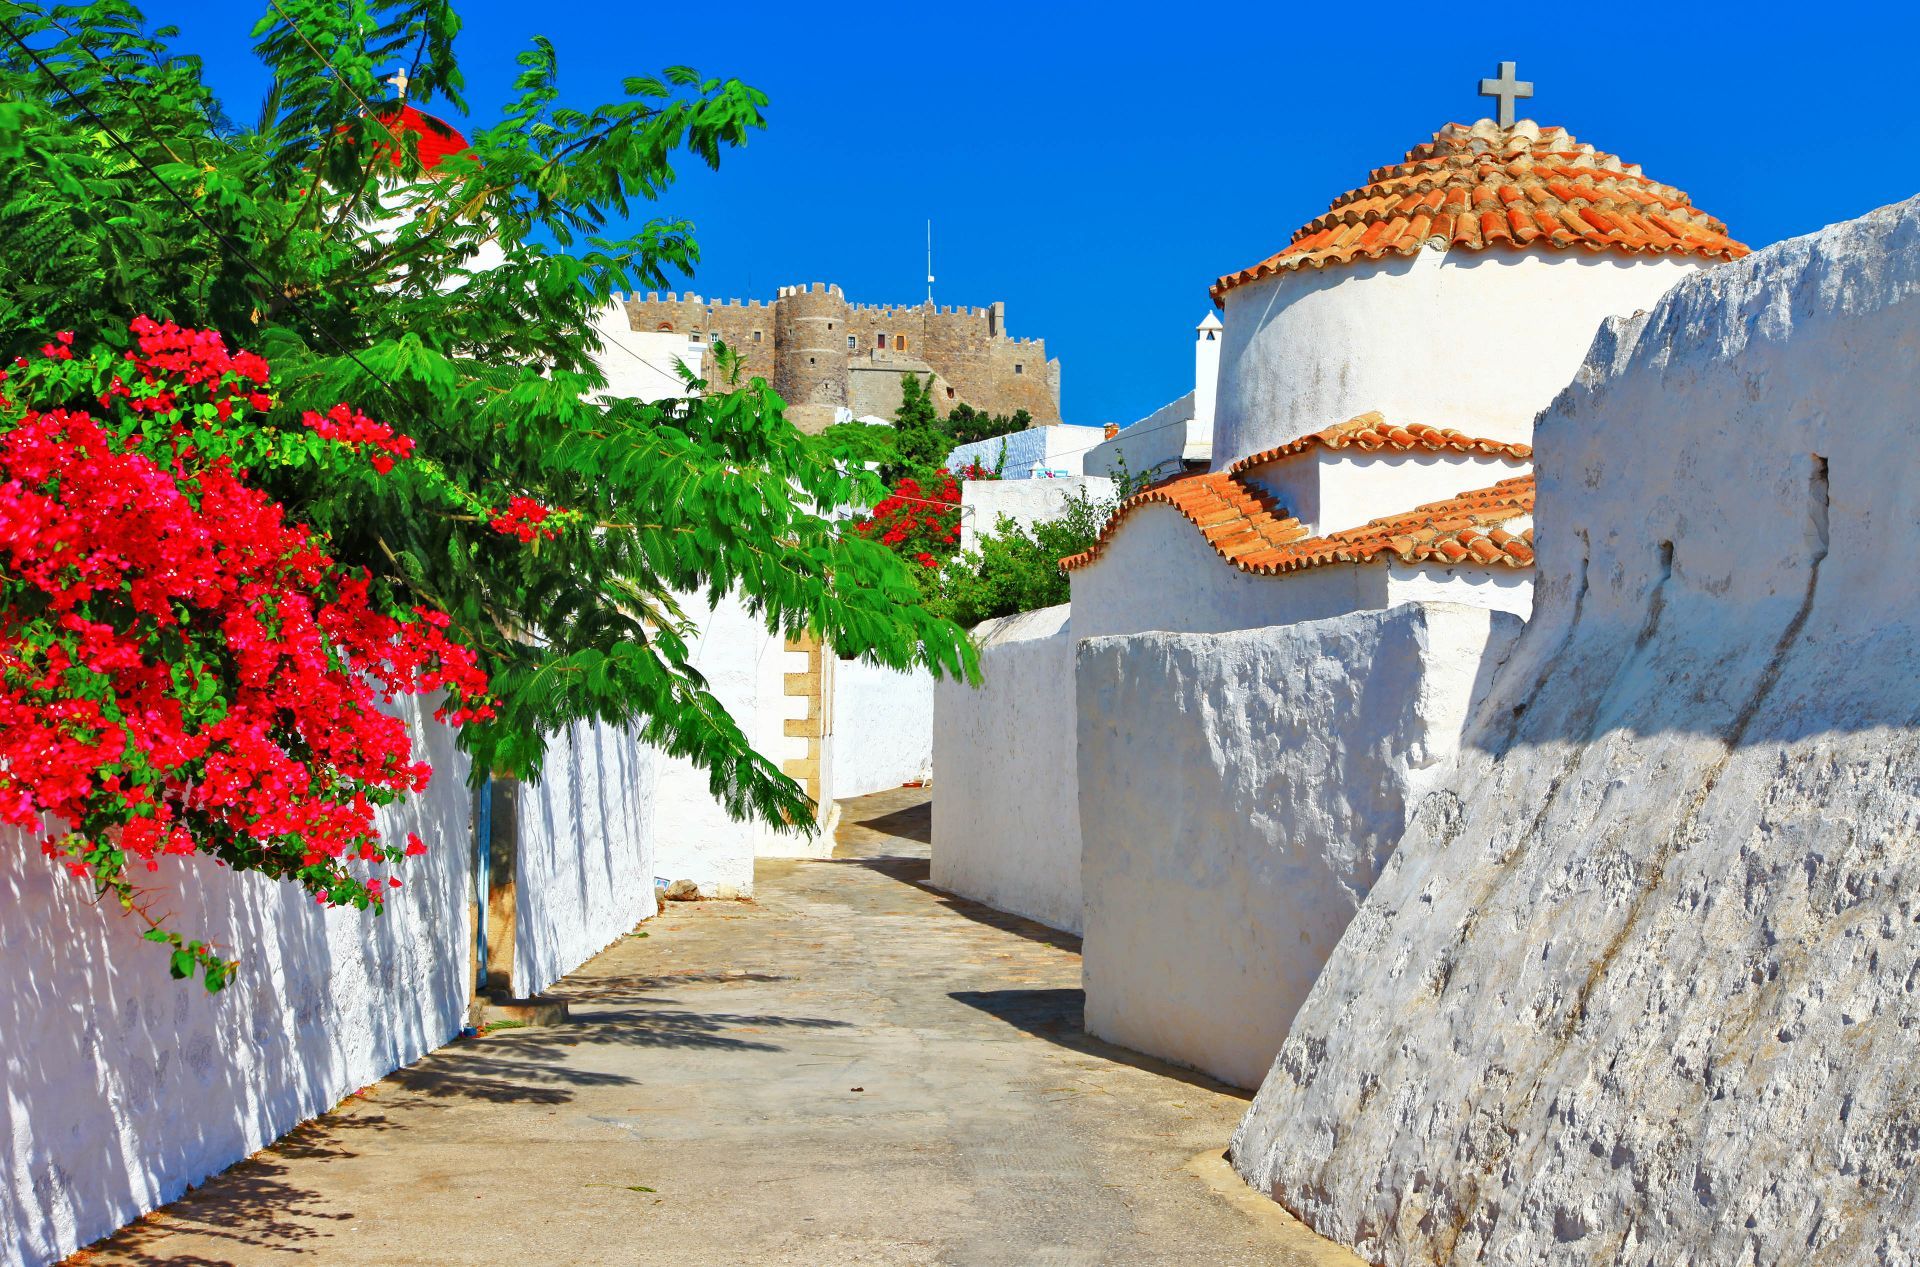 Patmos Greece: The alleys of Chora, the main village